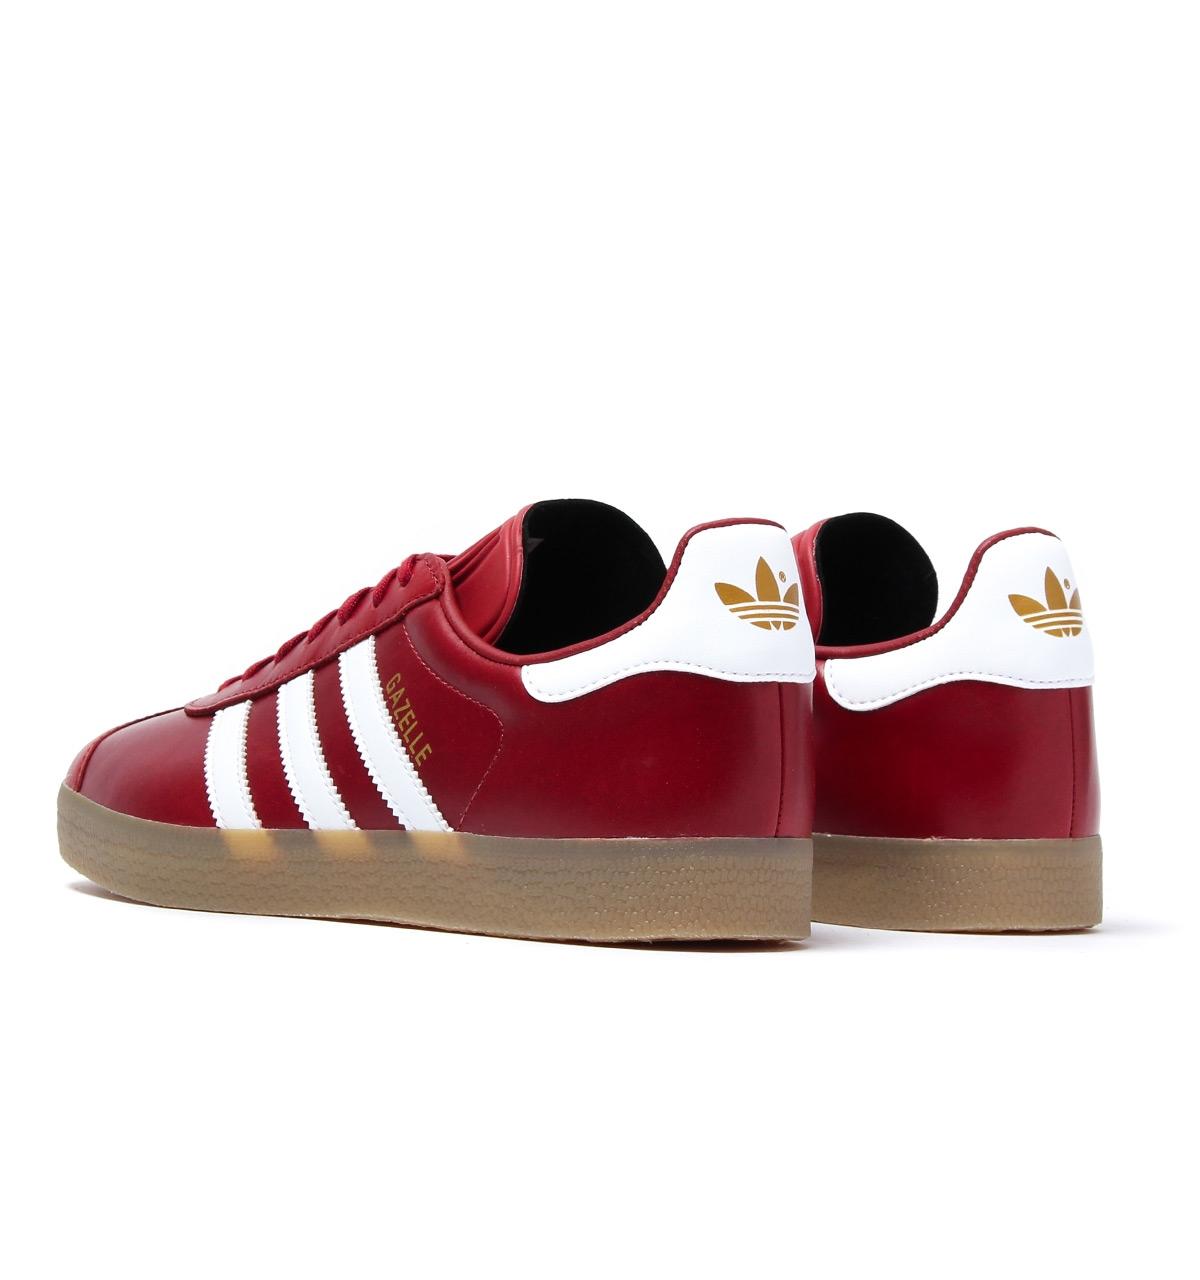 adidas Originals Mystery Red Leather Gazelle Trainers for Men - Lyst